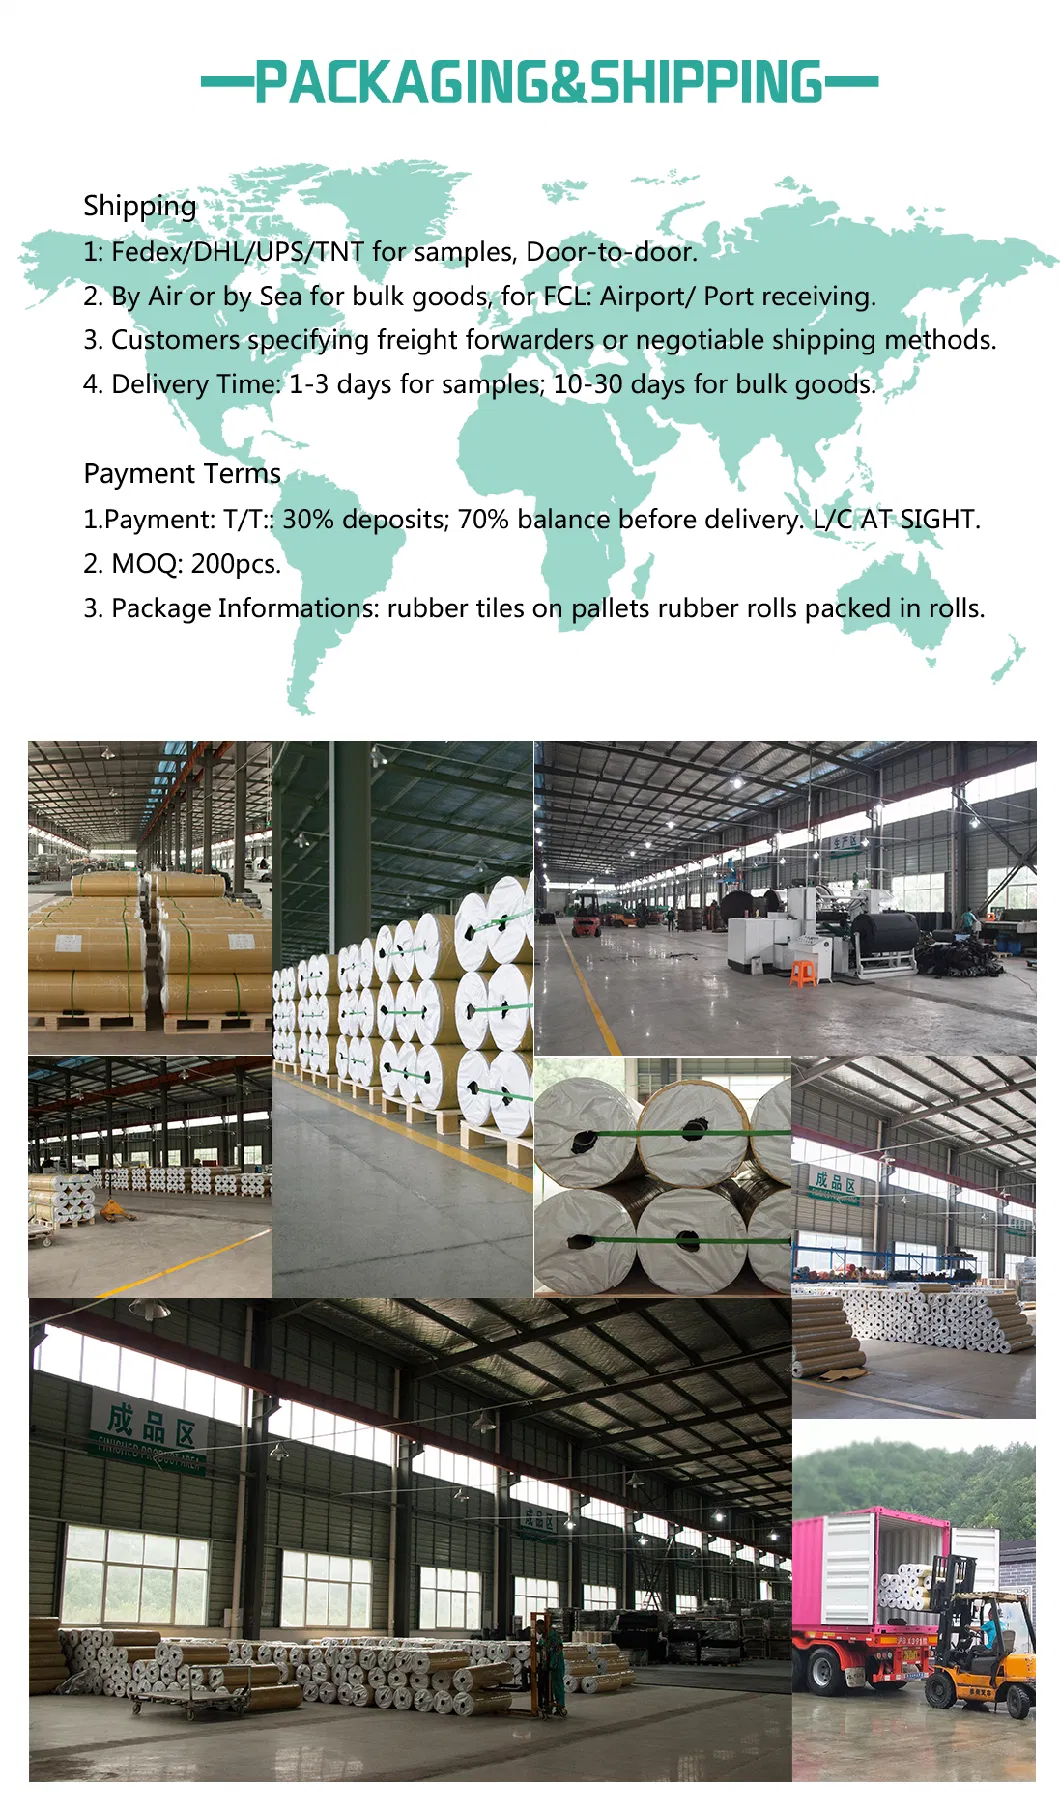 Factory Price Hot Selling Gym Rubber Roll Flooring Tile/Fire Resistant Rubber Floor Carpet and Mat for Sport Fitness